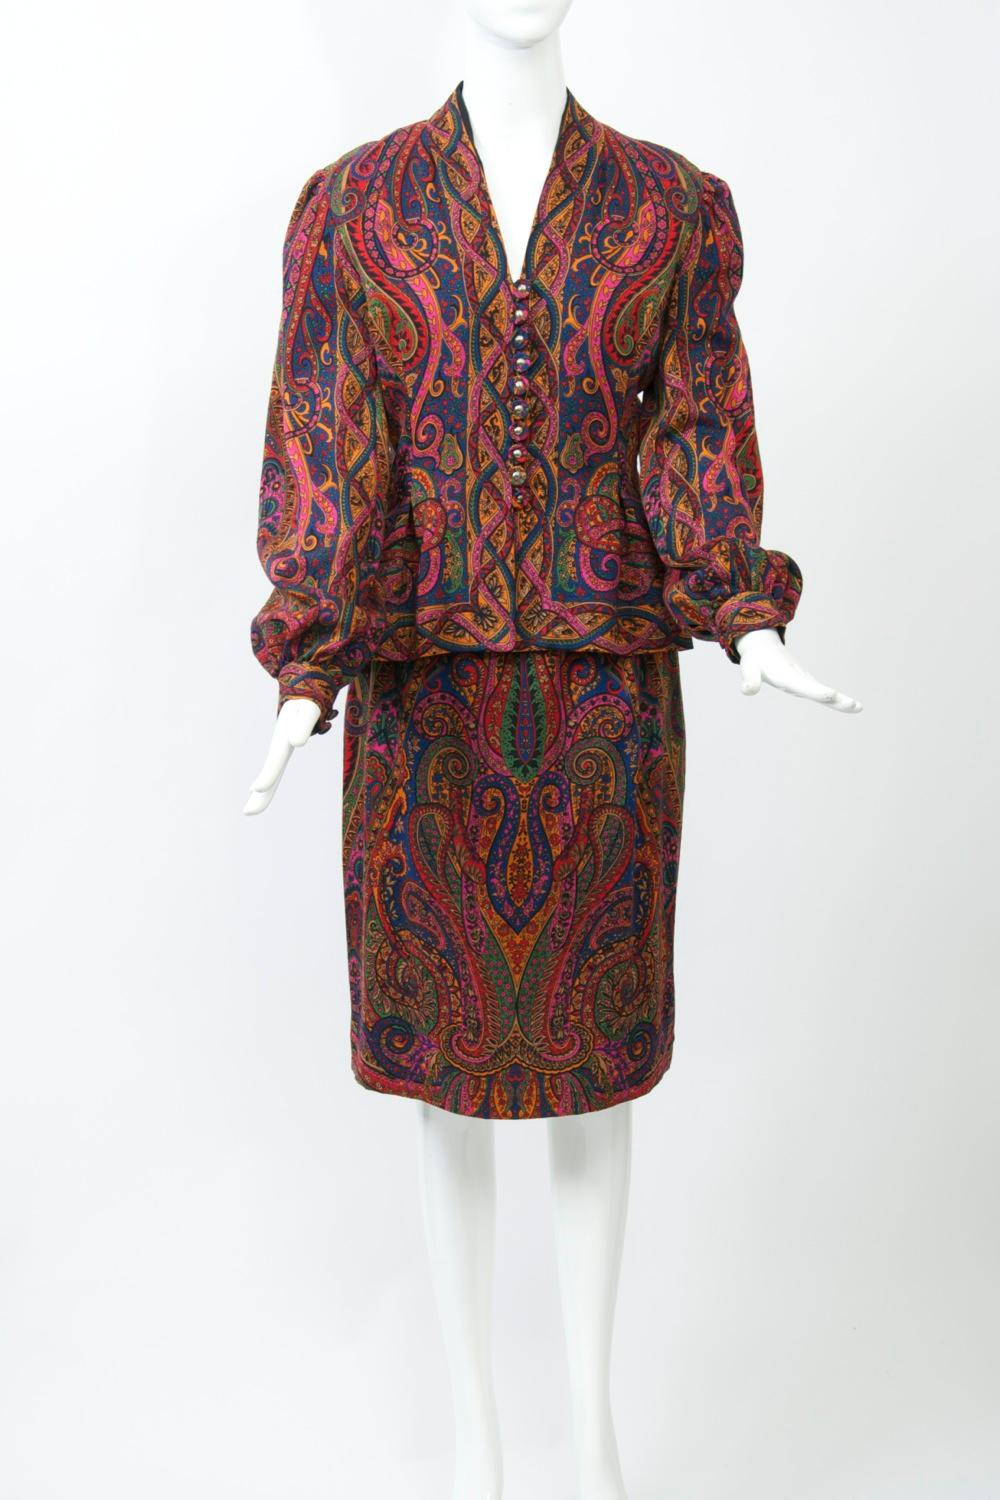 From one of the masters of American fashion, Featured is a two-piece dress or suit in a sophisticated palette paisley wool challis, from one of the masters of American fashion. The V-neck jacket has a darted bodice stitched to the waist, which then